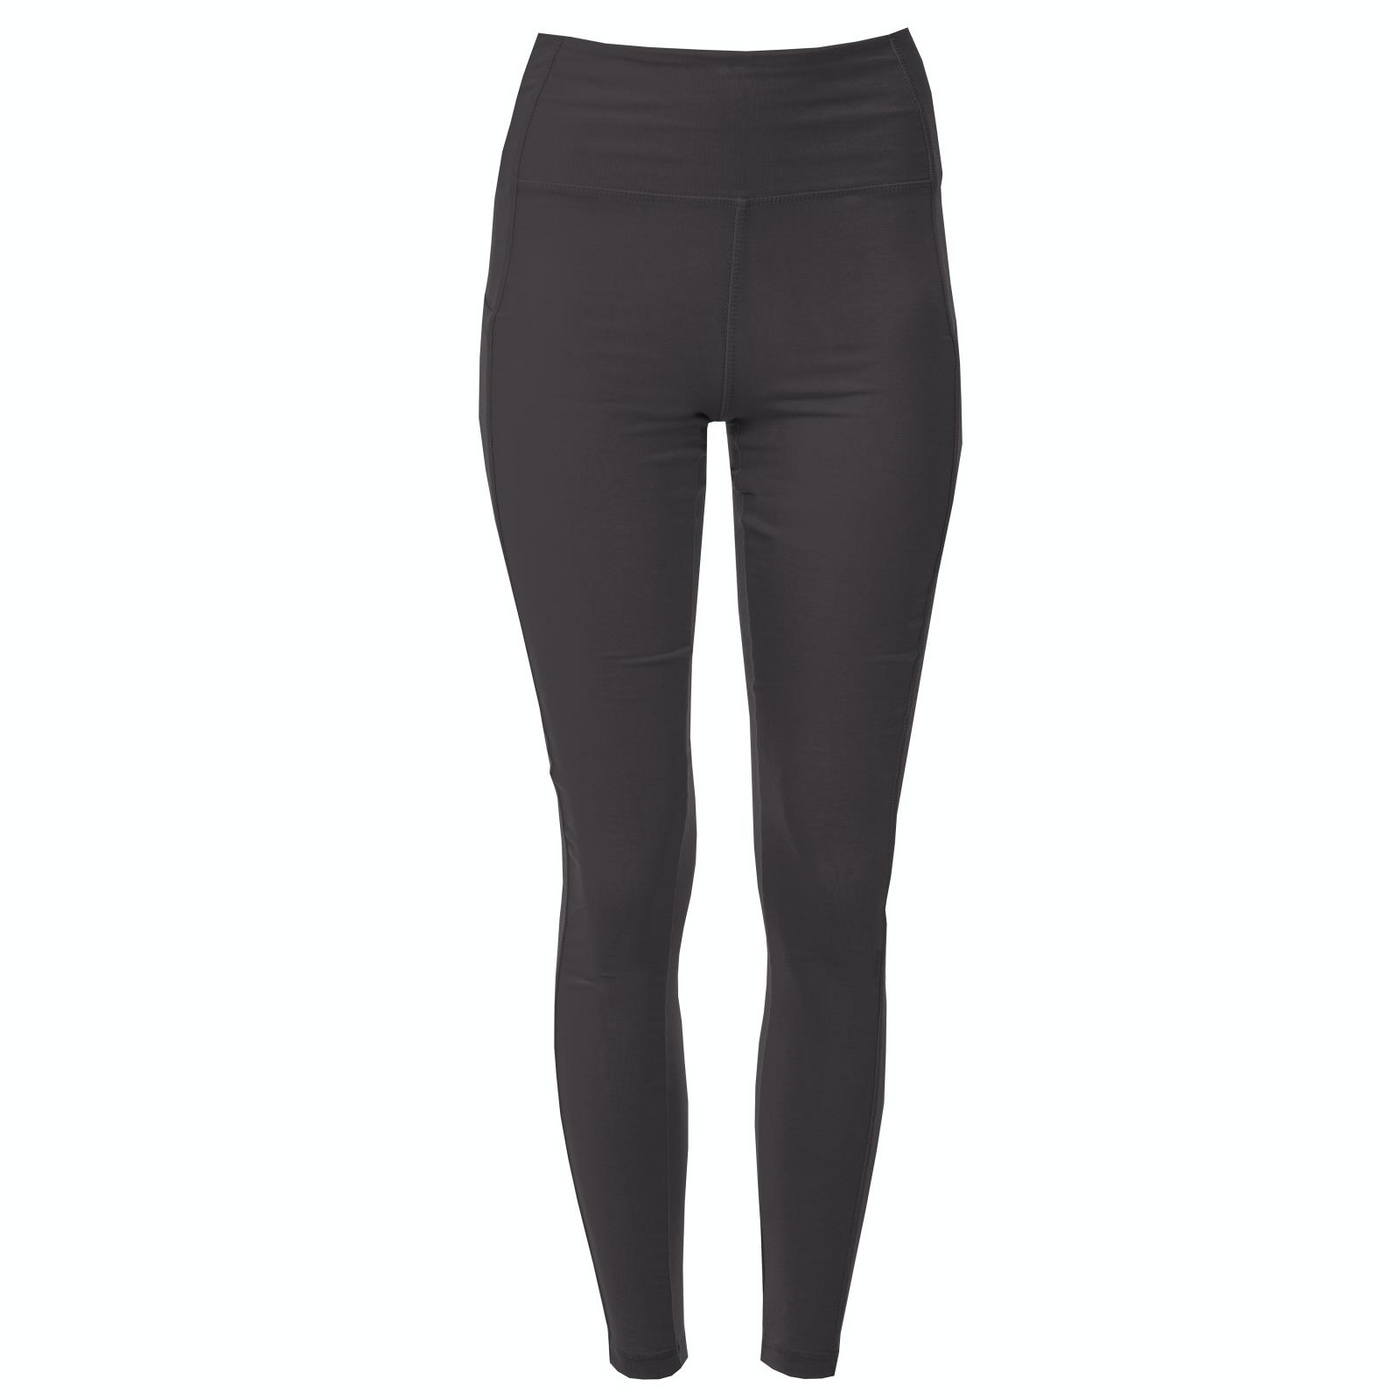 Kickee Pants Women's Luxe Stretch Leggings with Pockets: Solid Midnight (Full Length)